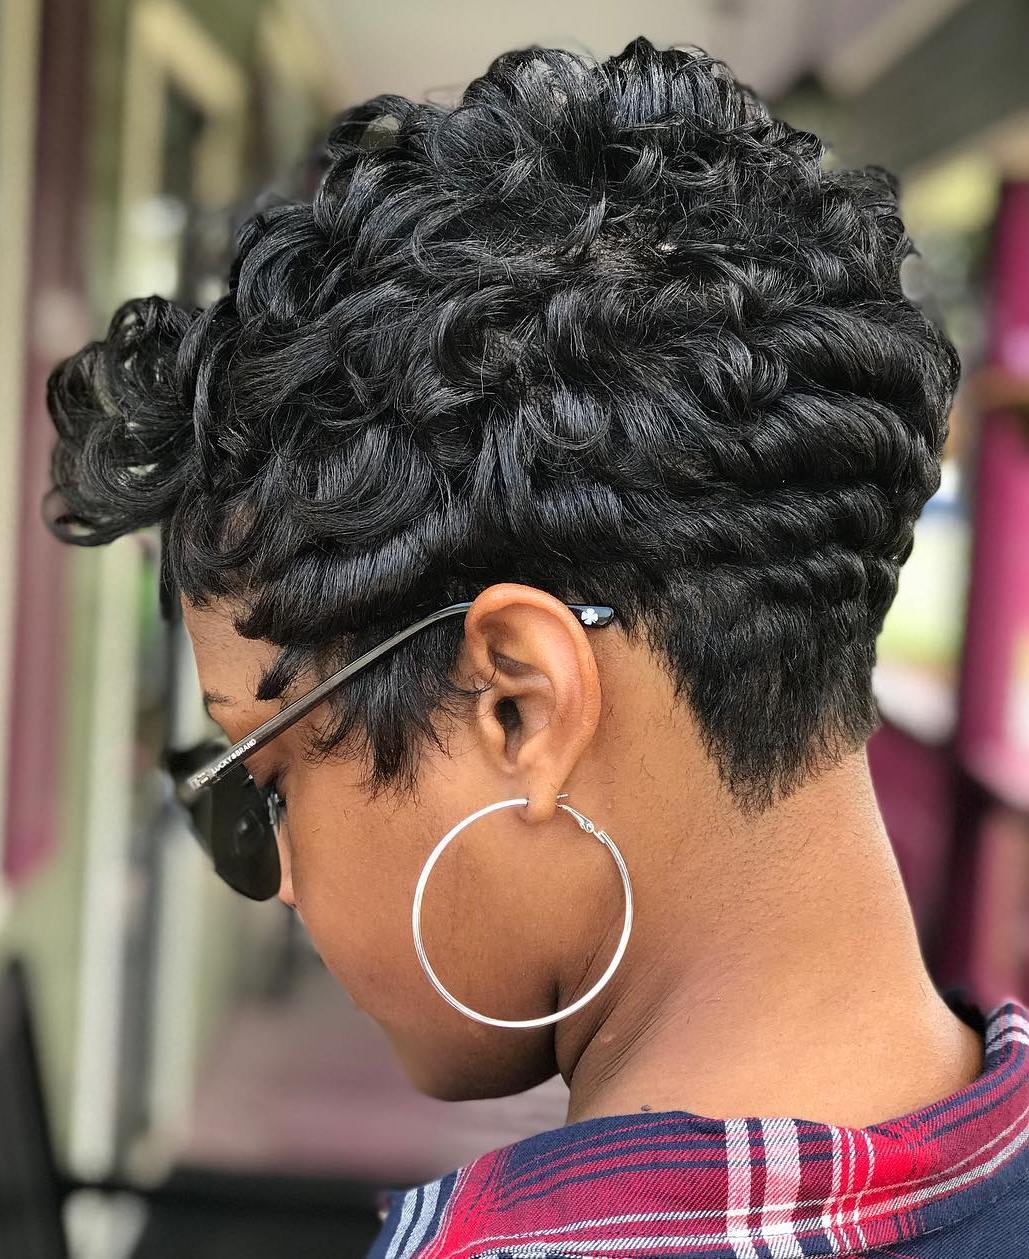 Best Guide On Short Natural Haircuts For African American Women Over 60 |  by Leal Smith | Medium